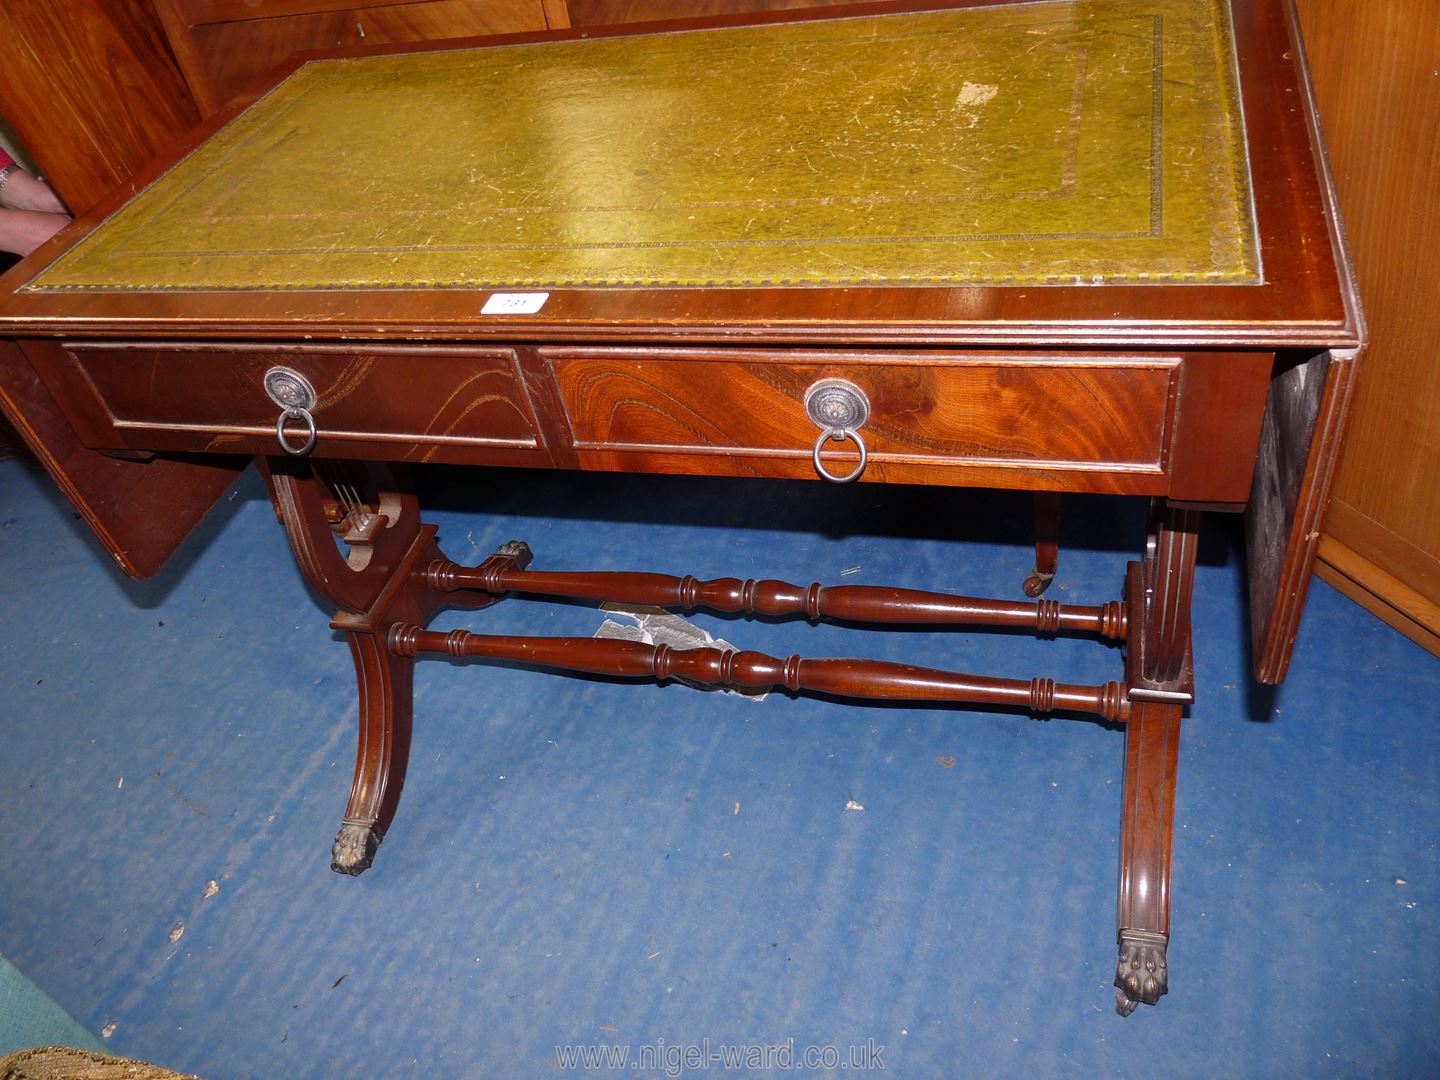 A drop leaf writing desk with lyre sides and green leather inserts, on casters, 57'' x 20'' x 29''.